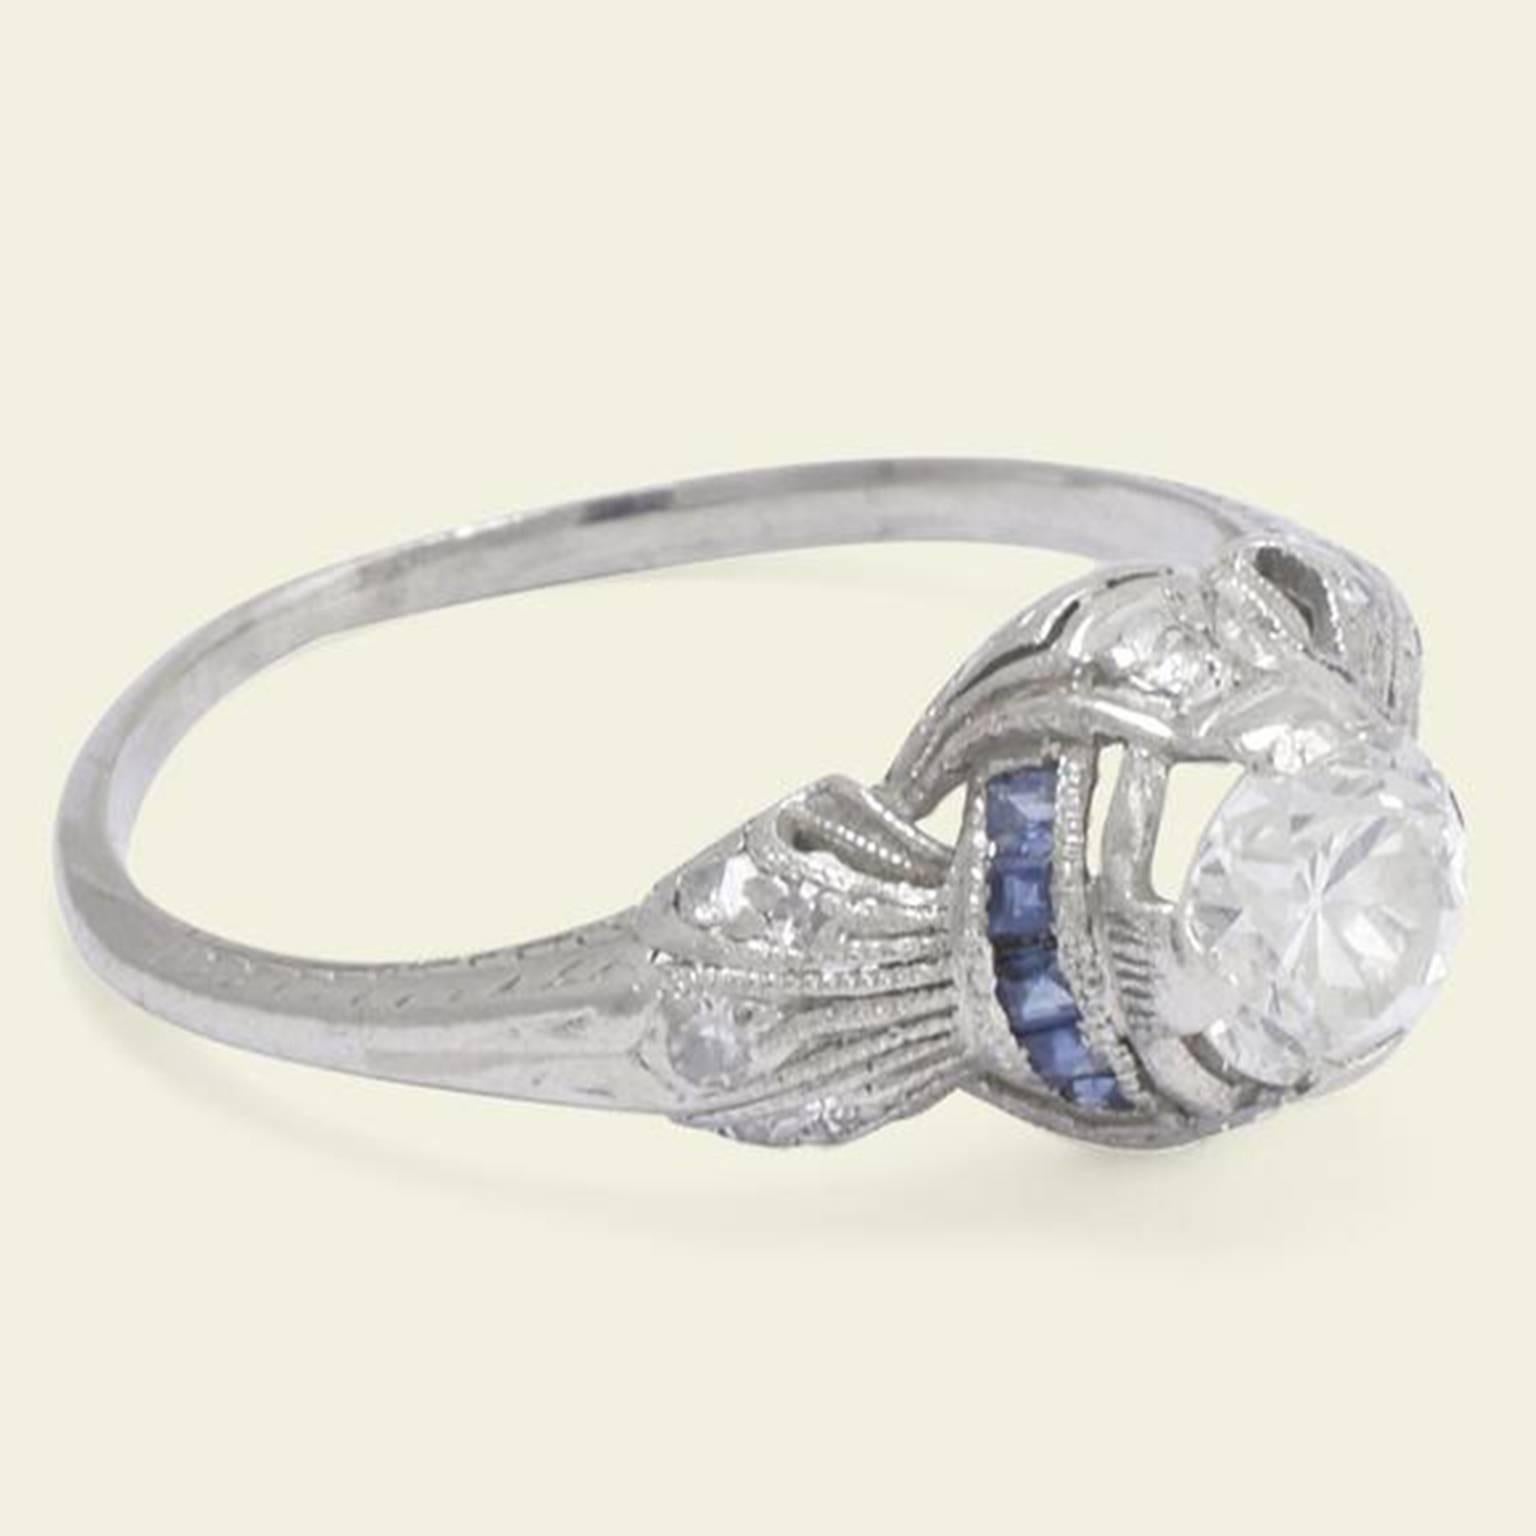 This platinum engagement ring dates to the 1920s. The central .71ct transitional cut diamond (G-H/VS1) surmounts an elaborate setting with diamonds set on the north and south sides and arcs of calibré cut sapphires to the east and west. The fluted